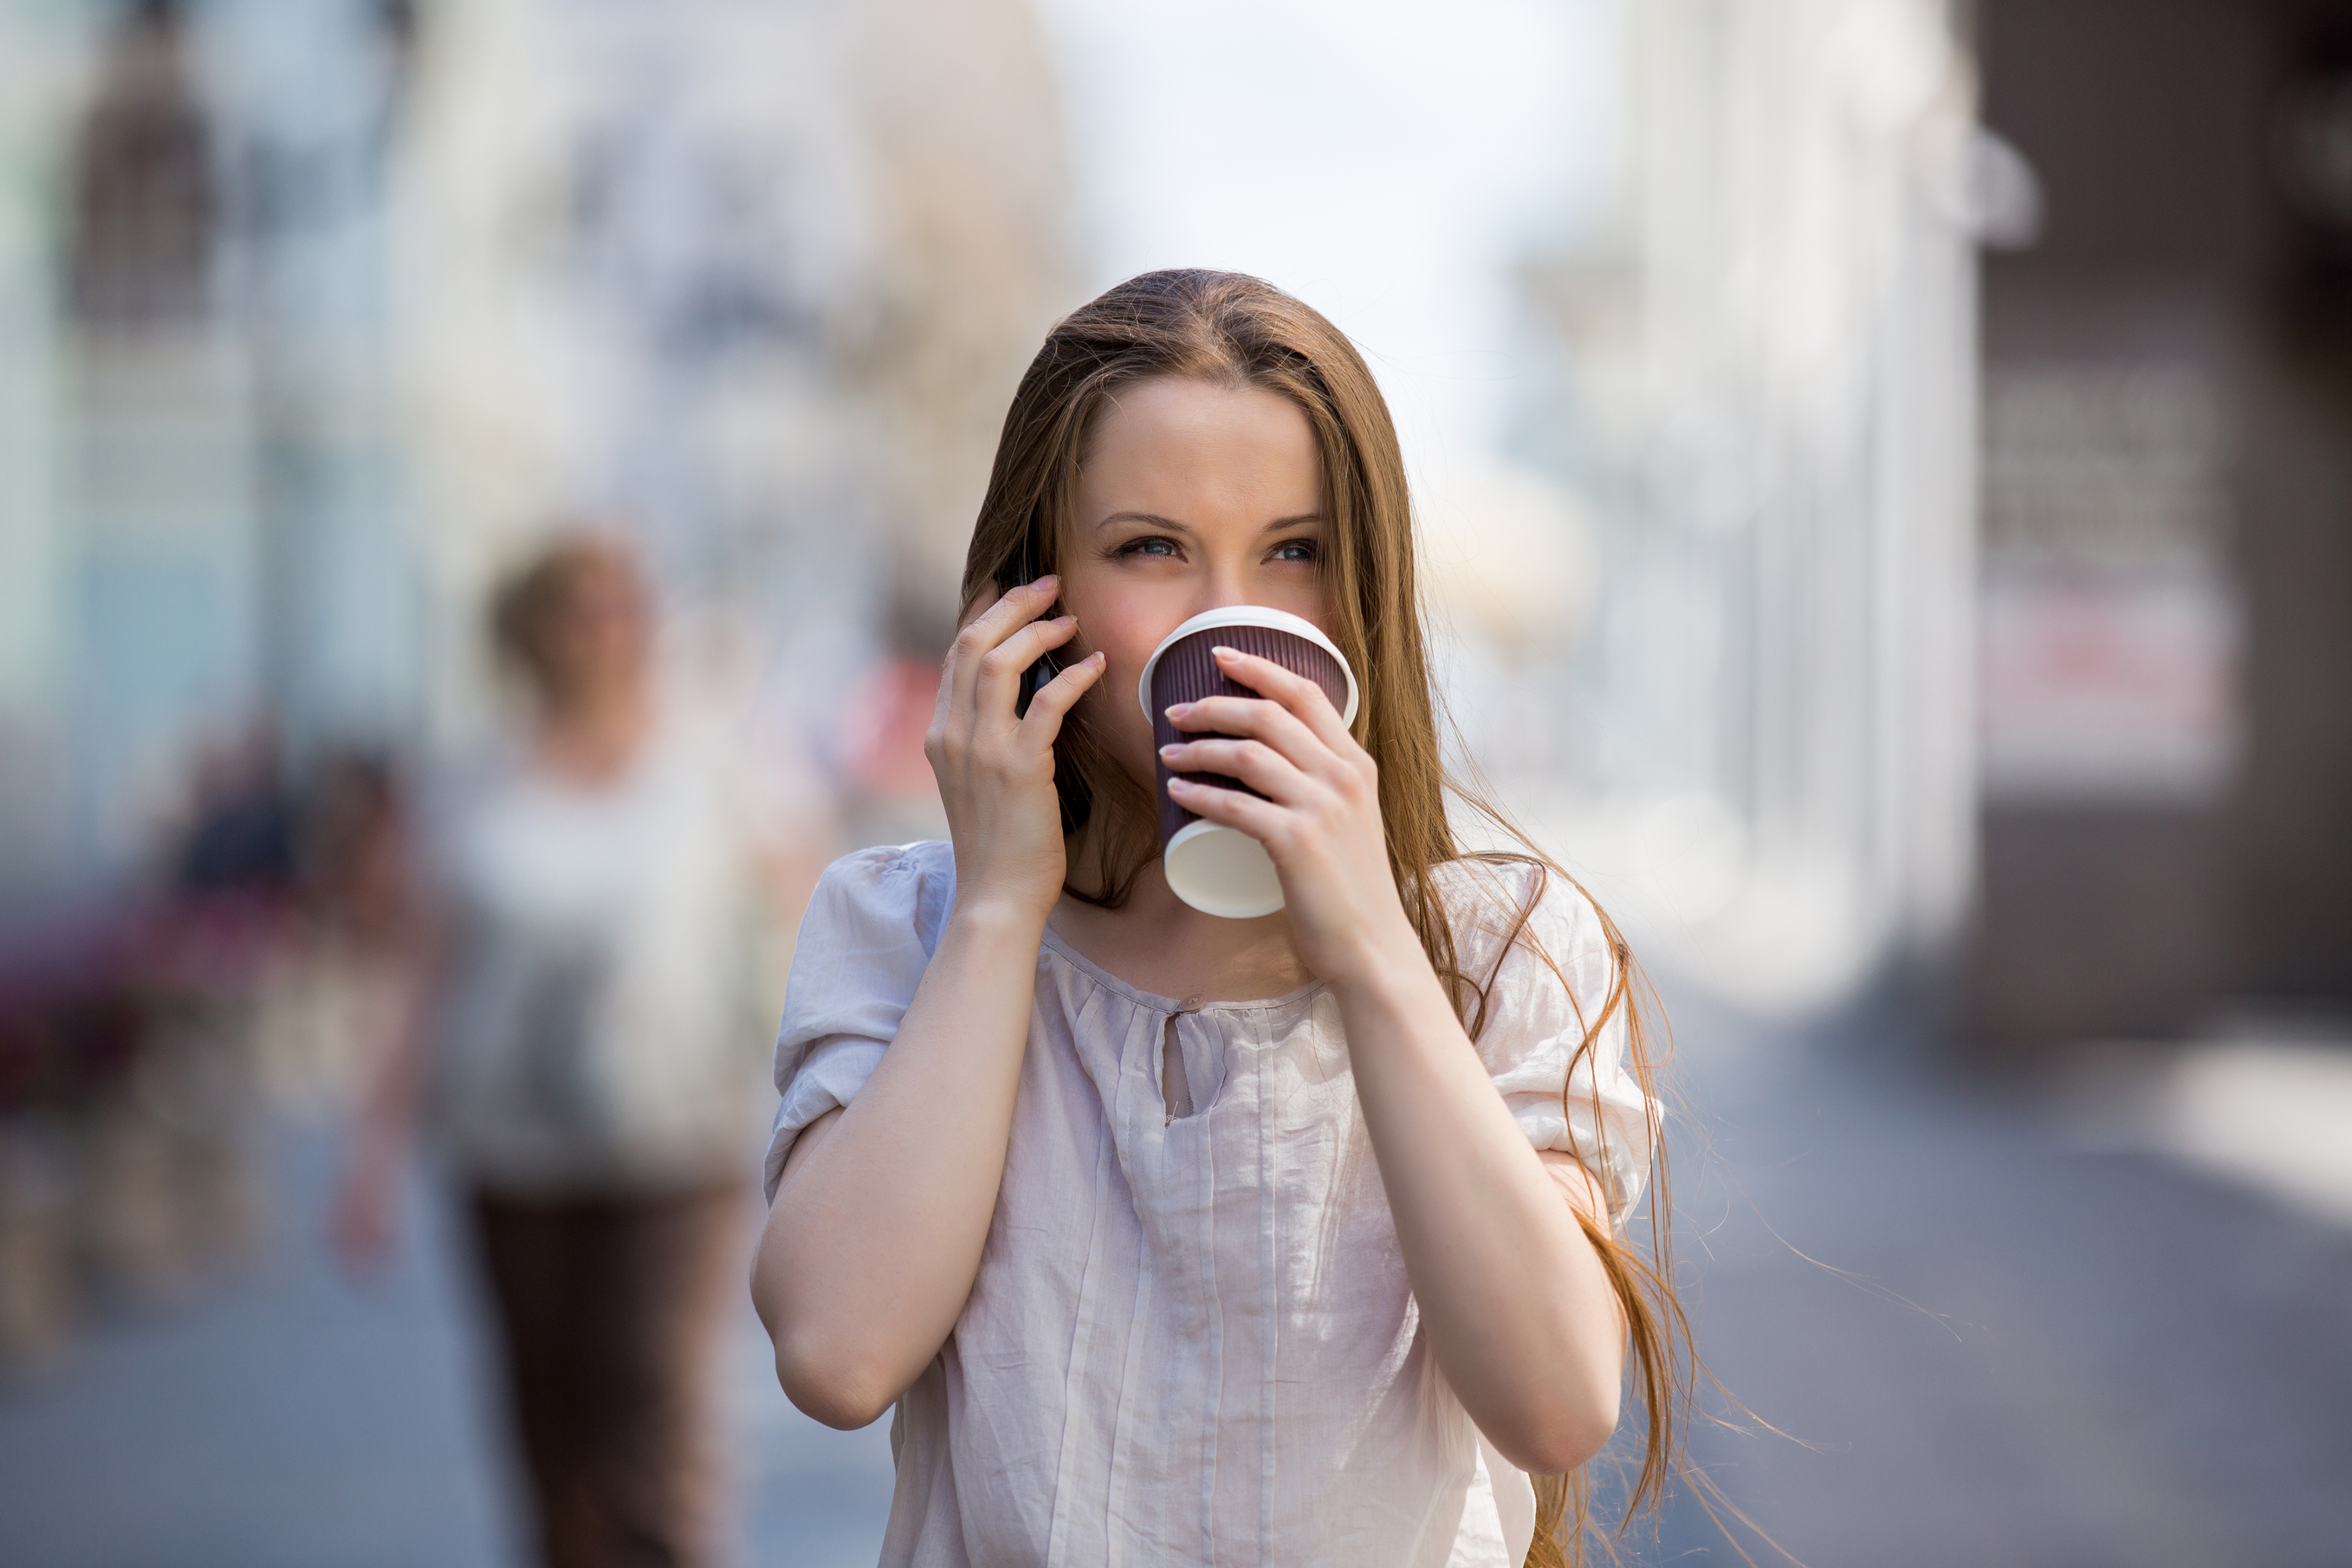 Young woman walking on the street and drinking coffee. She is talking on the phone with a take away cup of coffee